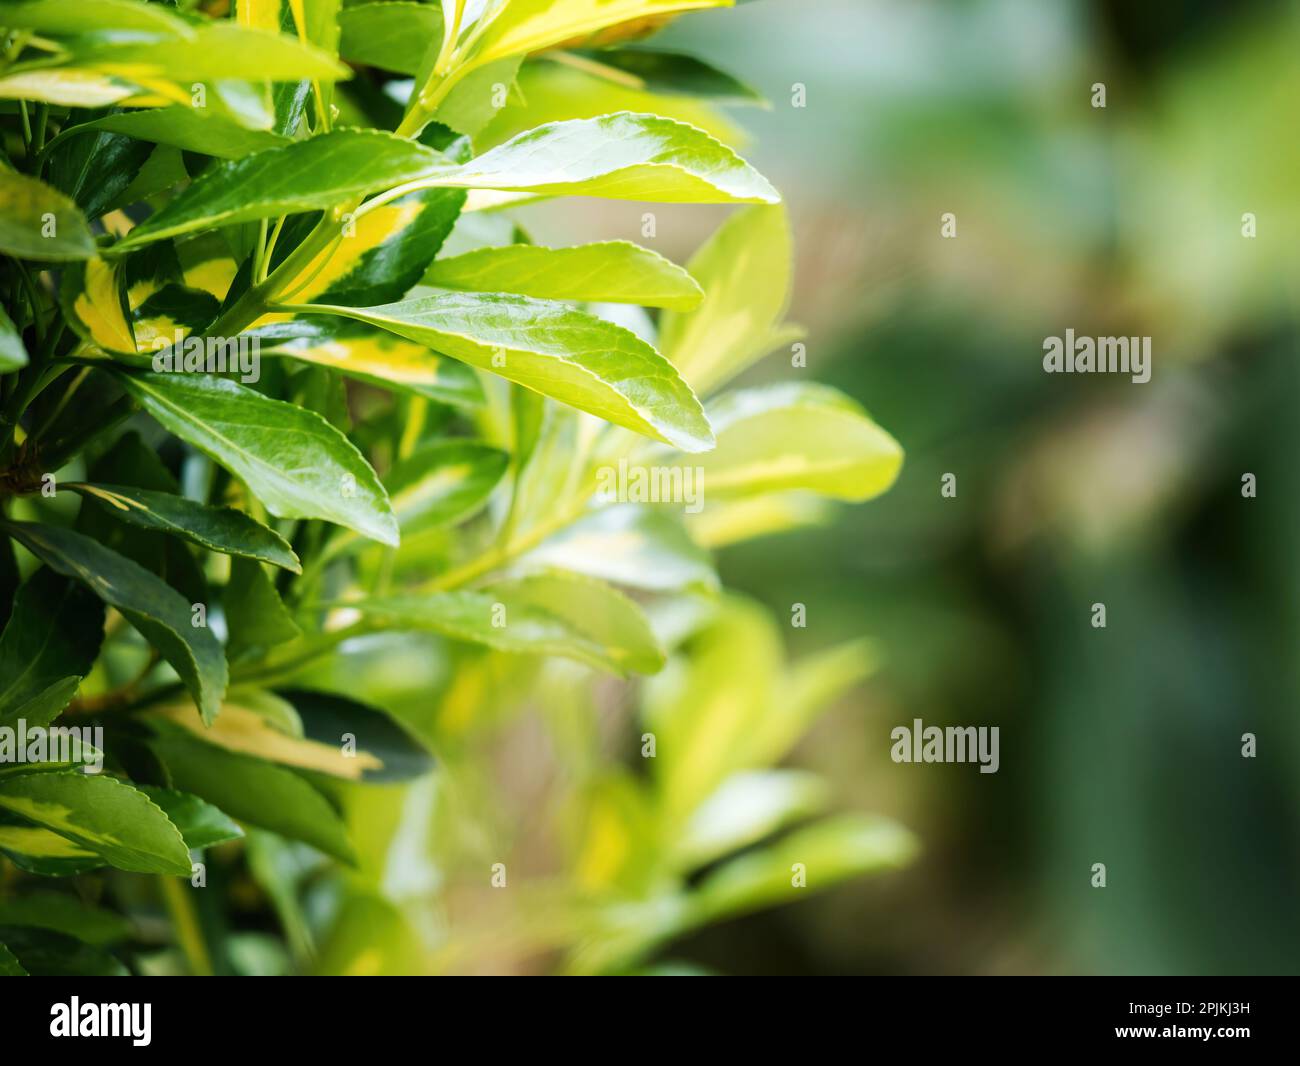 A close-up of a small evergreen spindle tree, part of the Celastraceae family, showing delicate green spring growth. Perfect for food and drink or gardening. Stock Photo